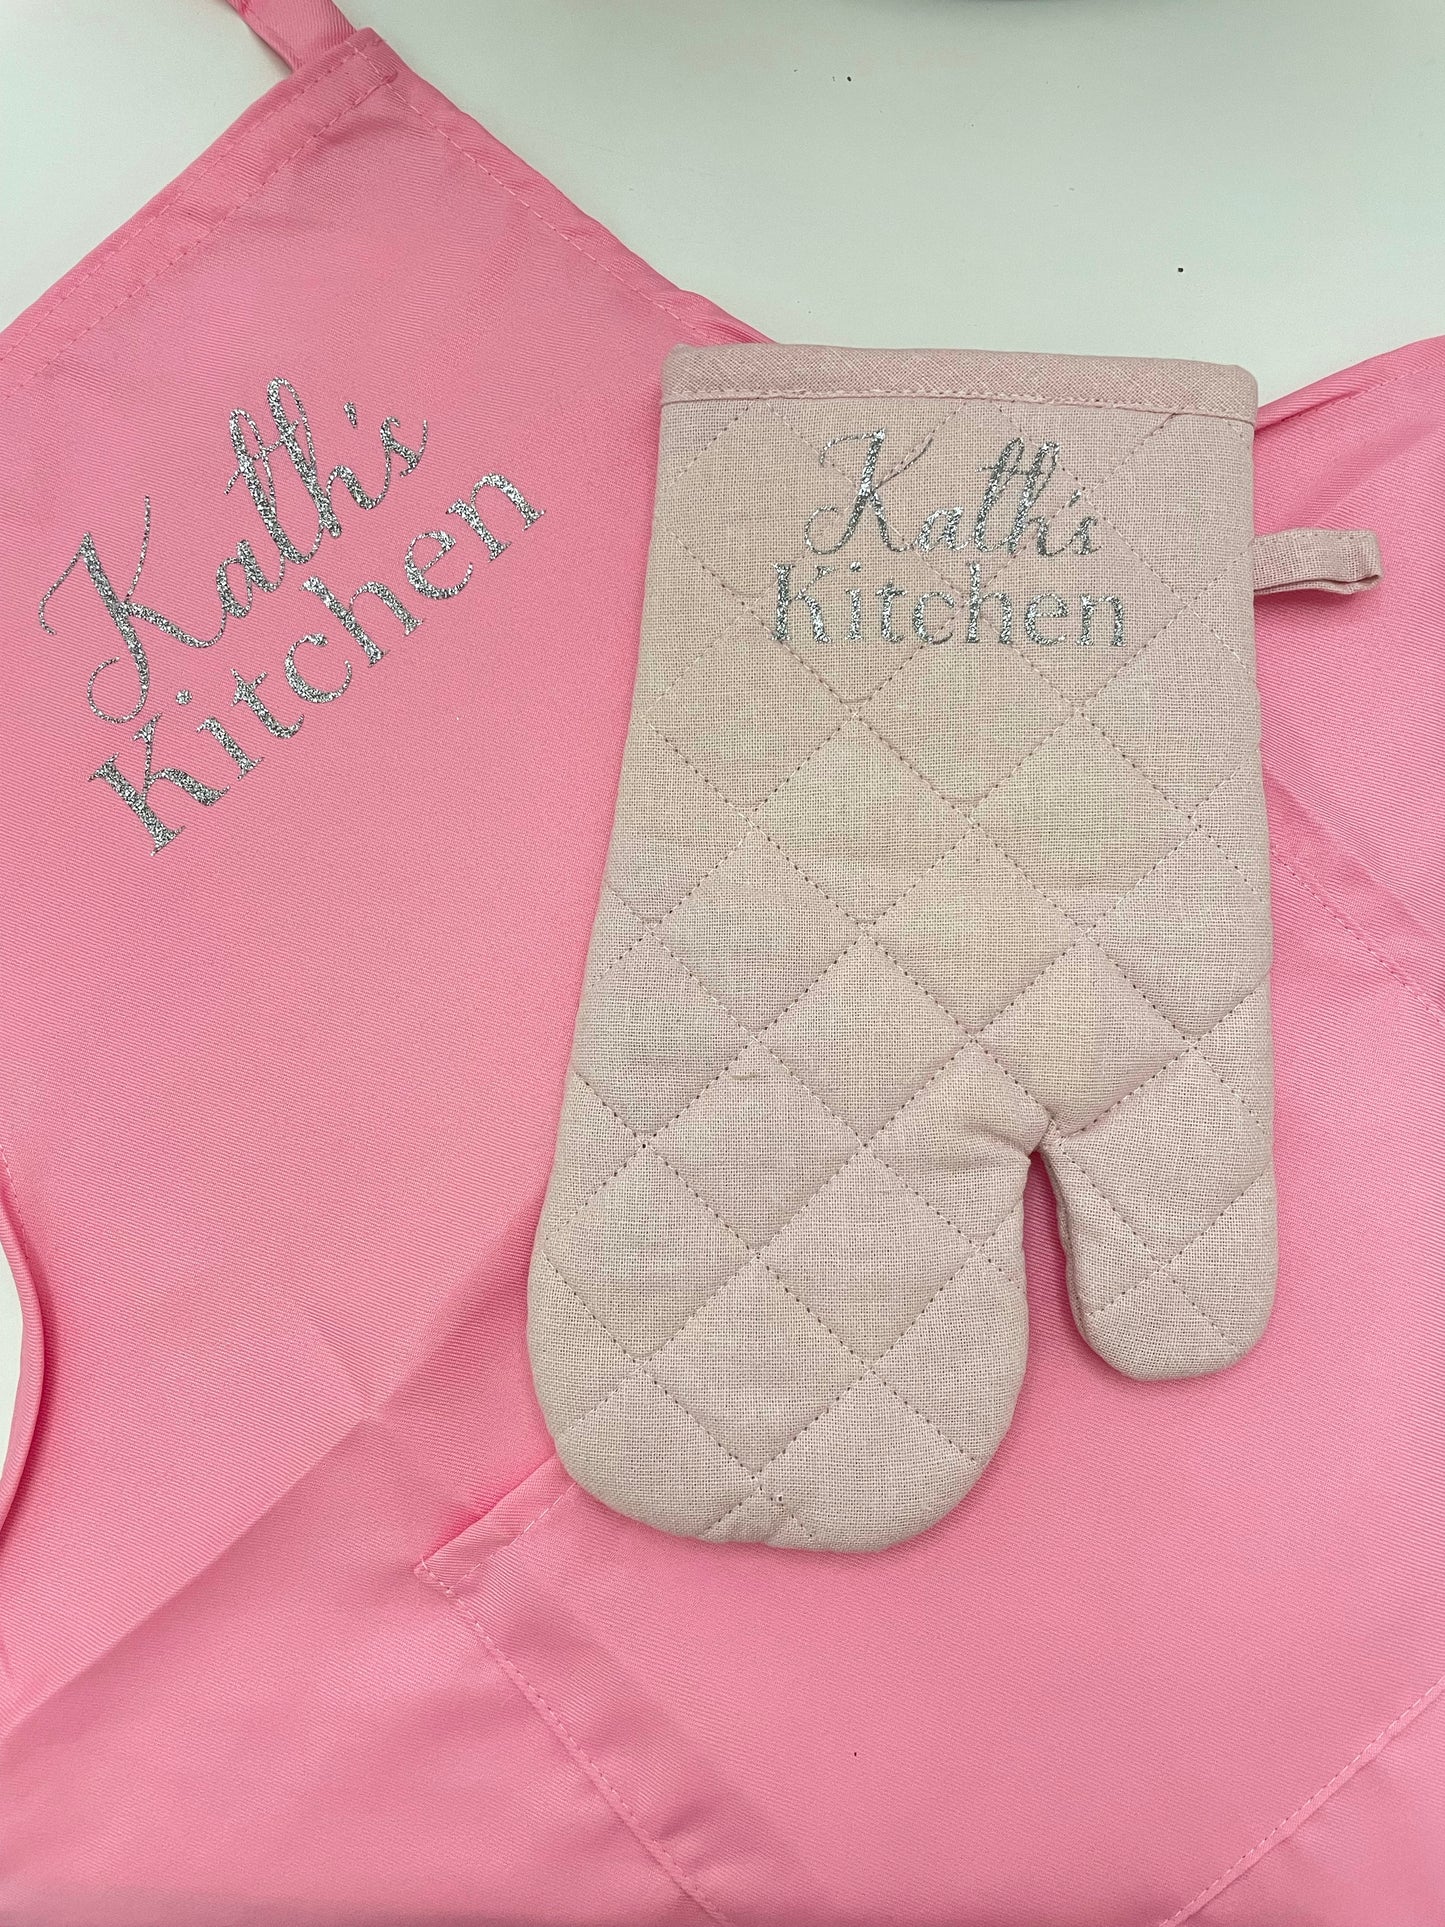 Personalised oven gloves